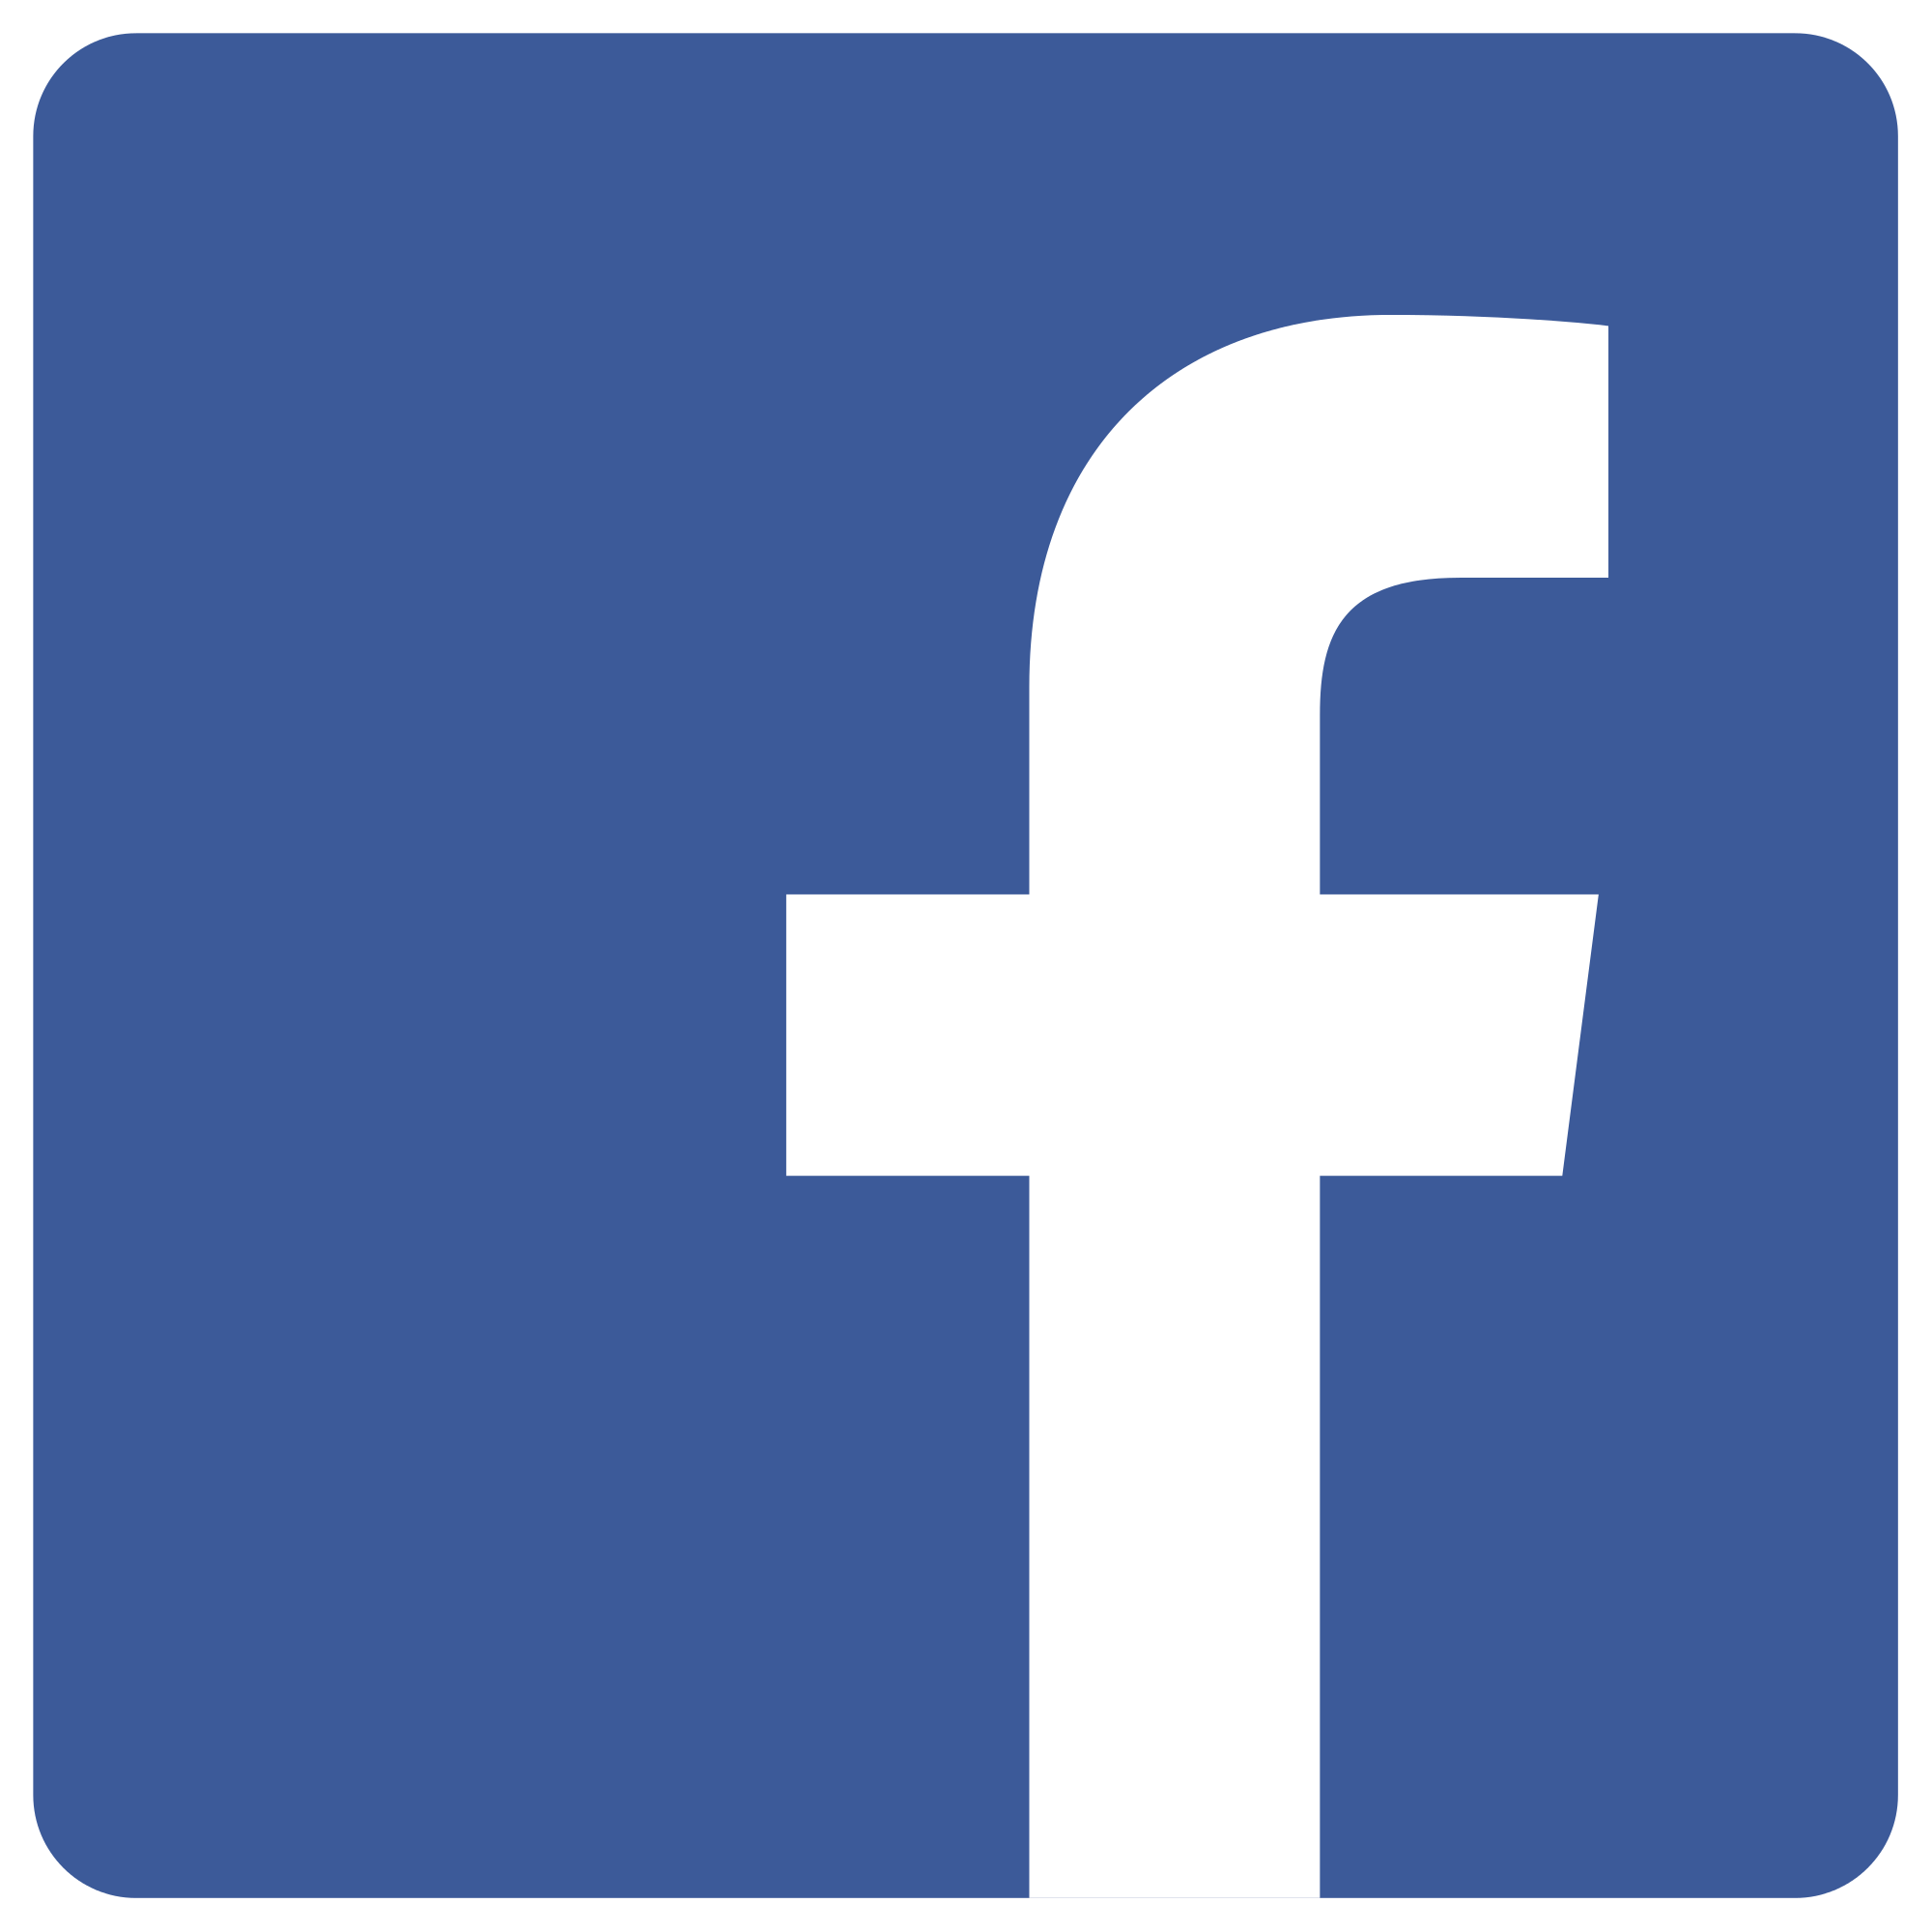 With facebook